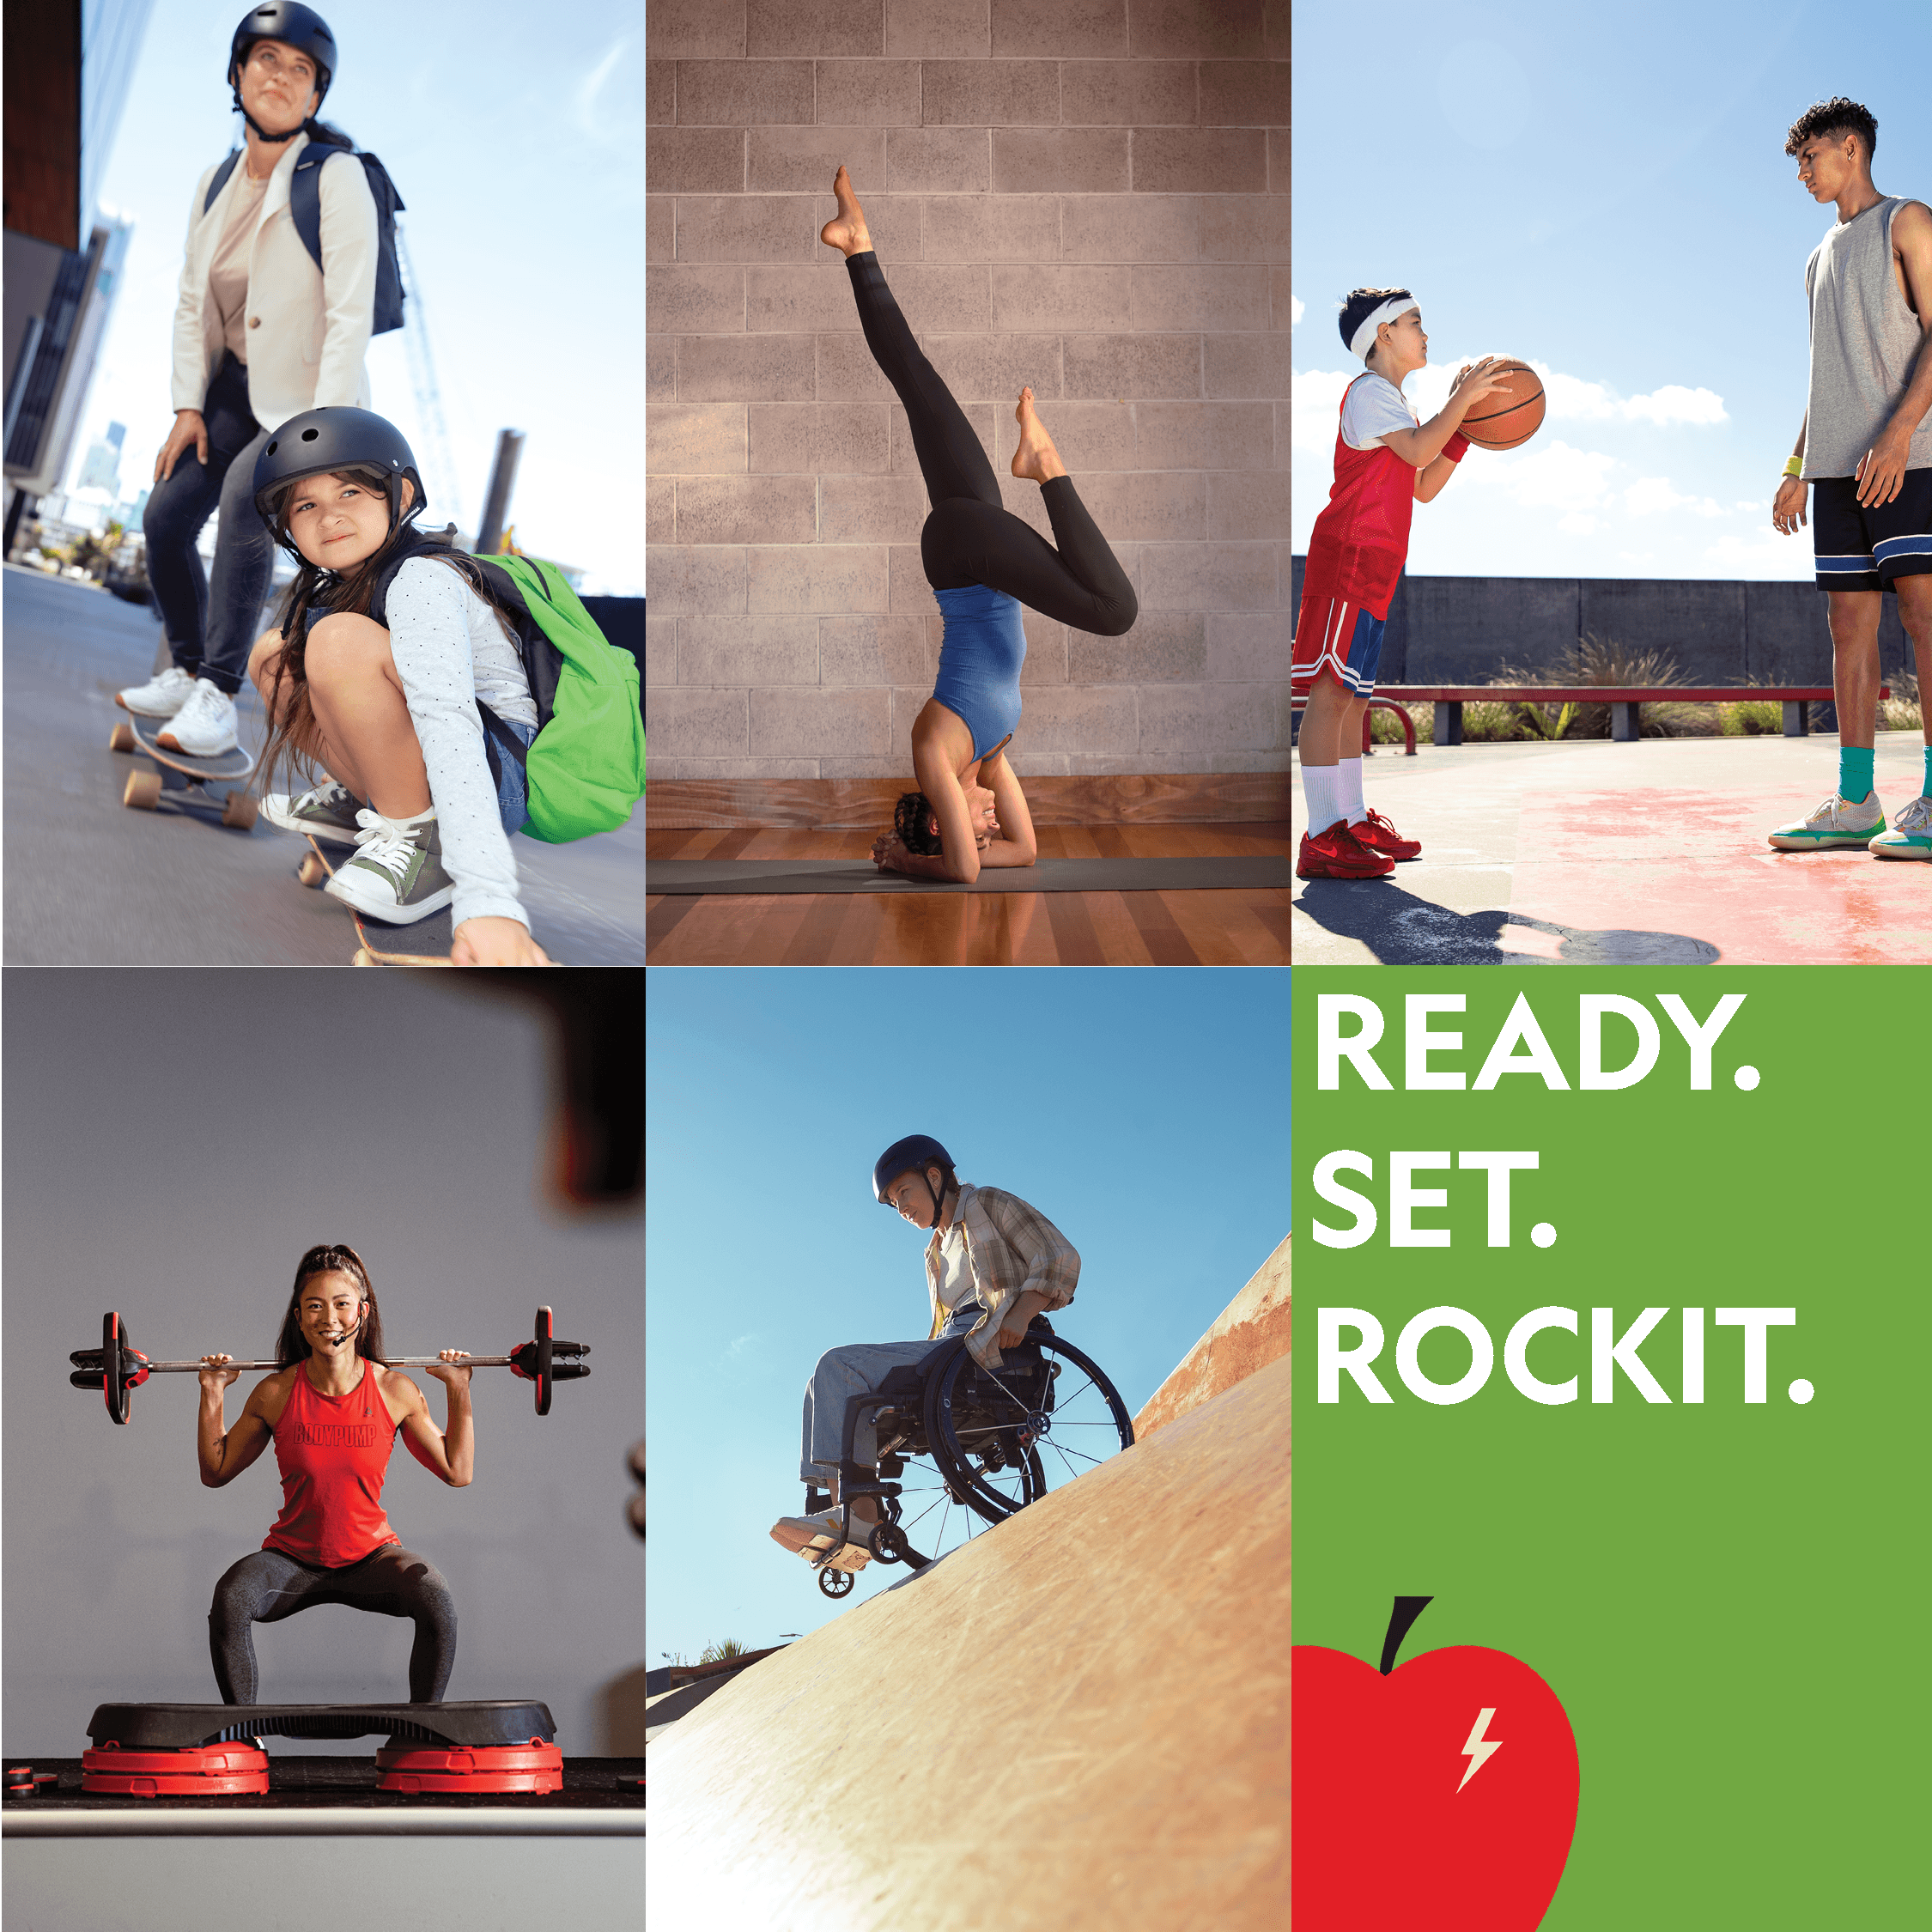 Collated image with 6 scenario's - Mum & child skateboarding, lady doing a headstand, small child up against a teenager shooting a basketball into a hoop, lady running a gym class doing a weighted squat, girl in a wheelchair going down a ramp.